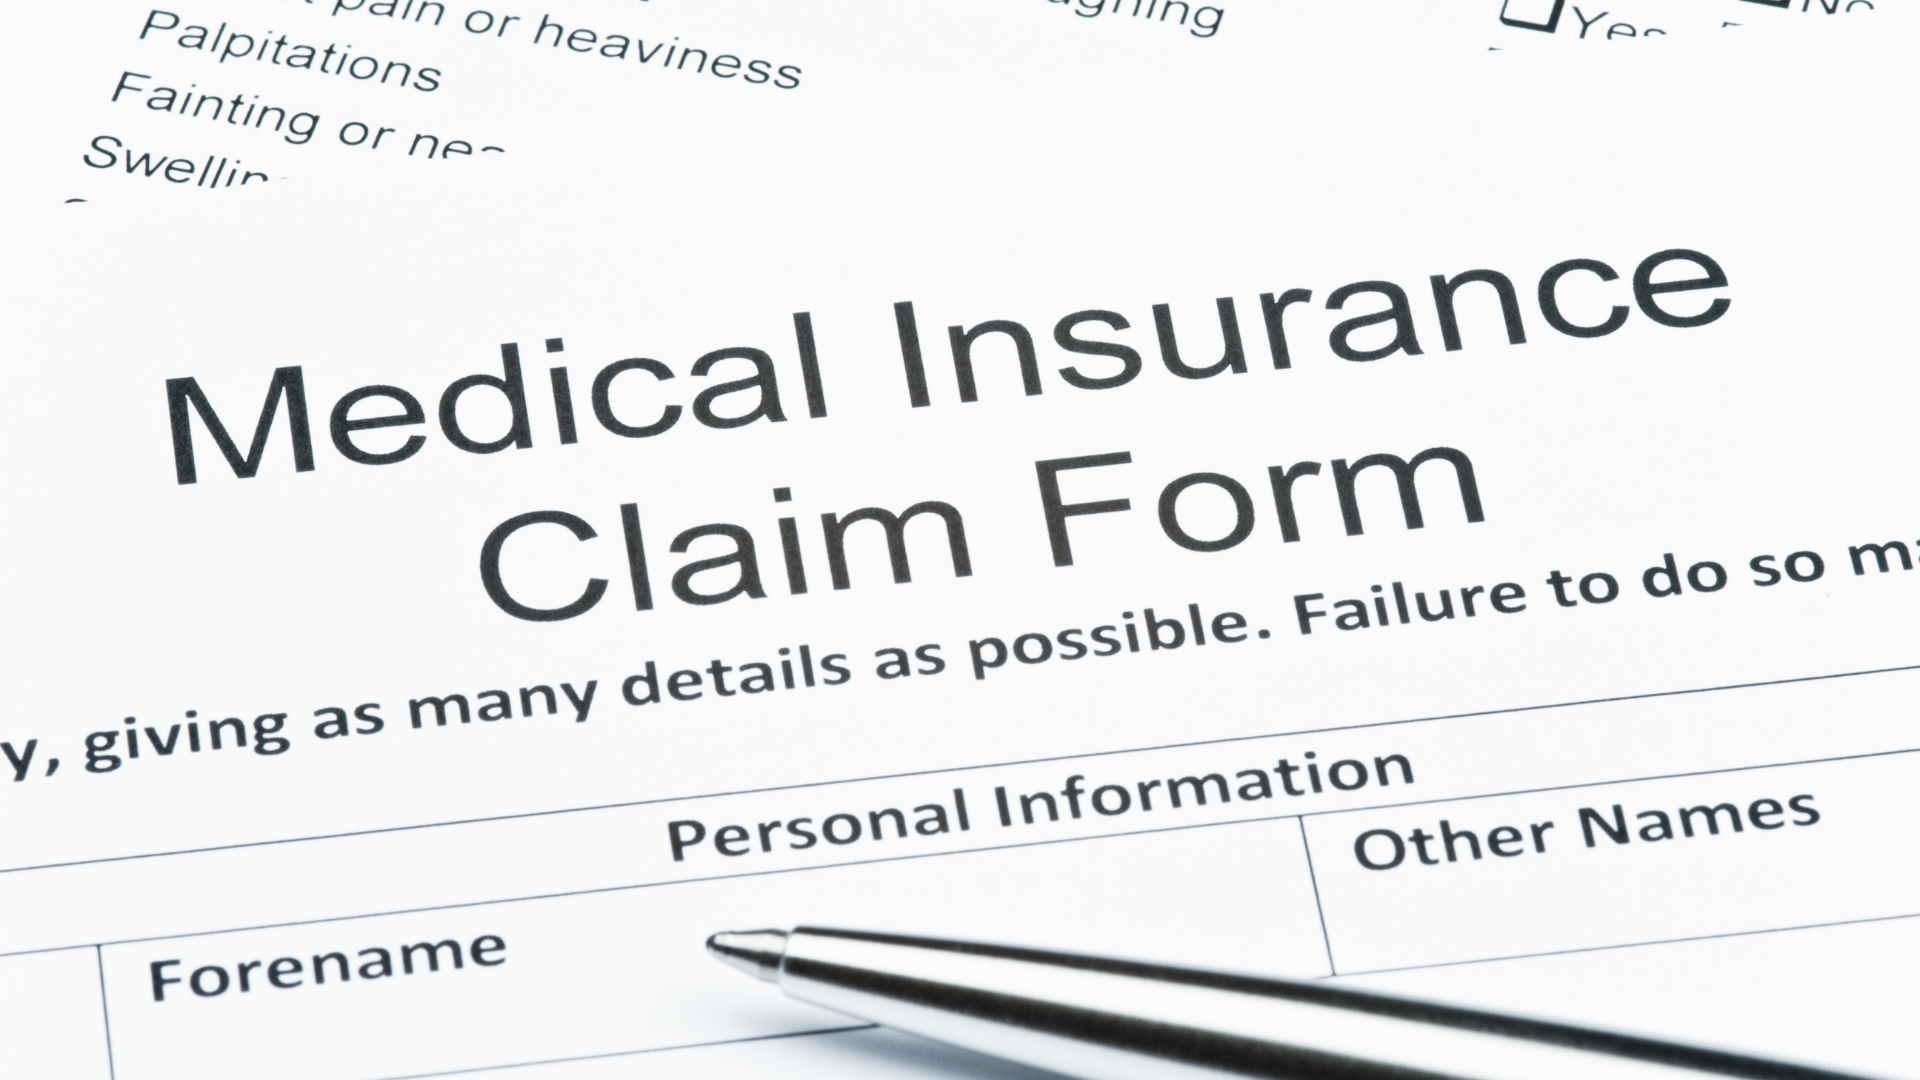 Impact on Group Medical Insurance Claims